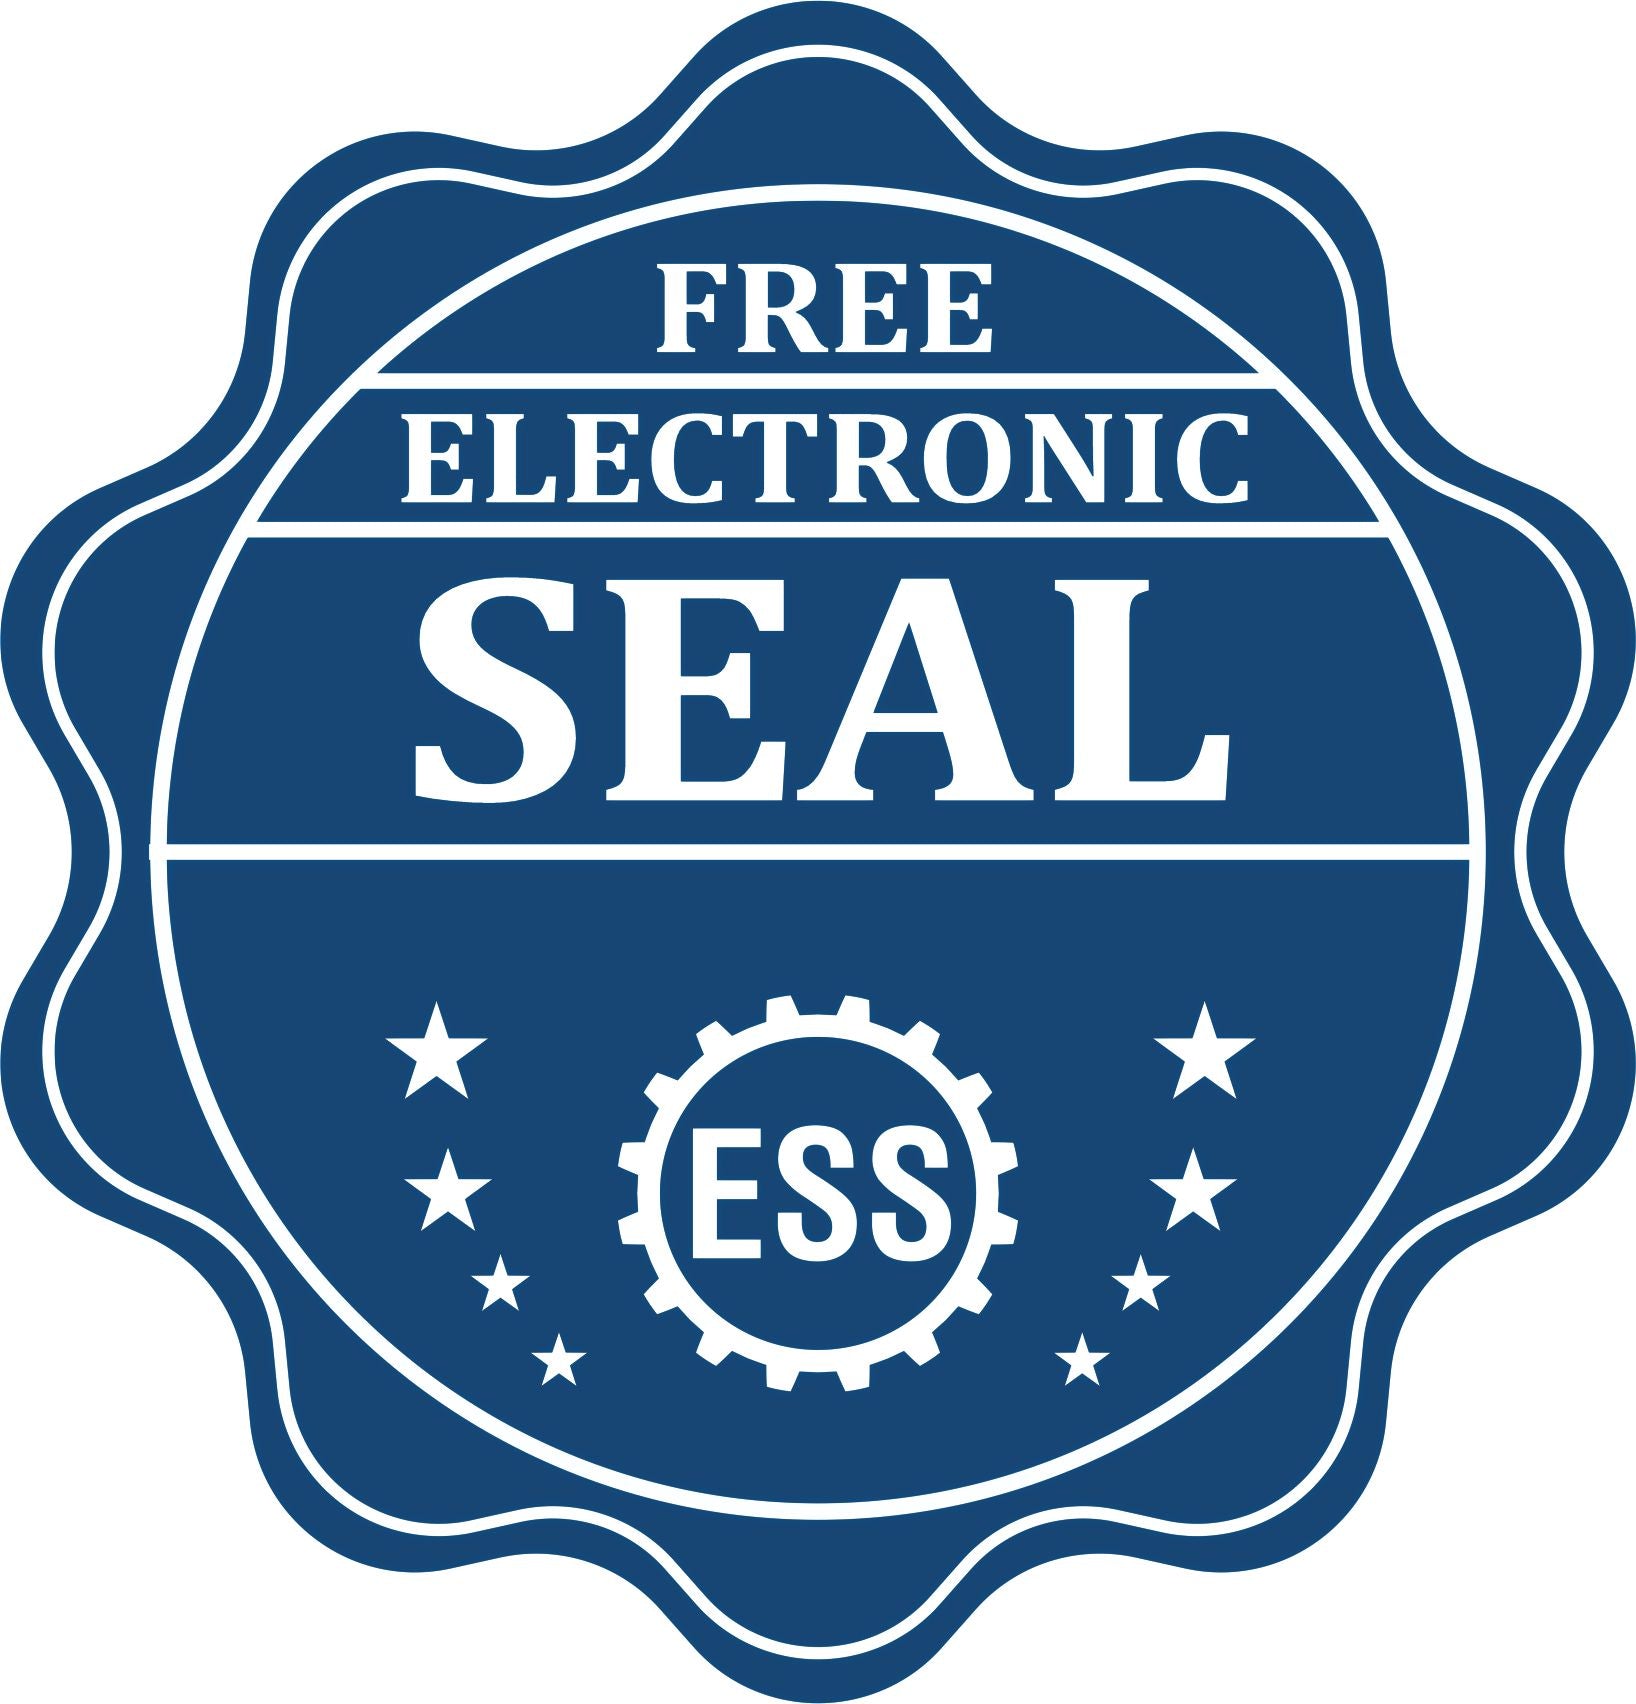 A badge showing a free electronic seal for the State of New Jersey Architectural Seal Embosser with stars and the ESS gear on the emblem.